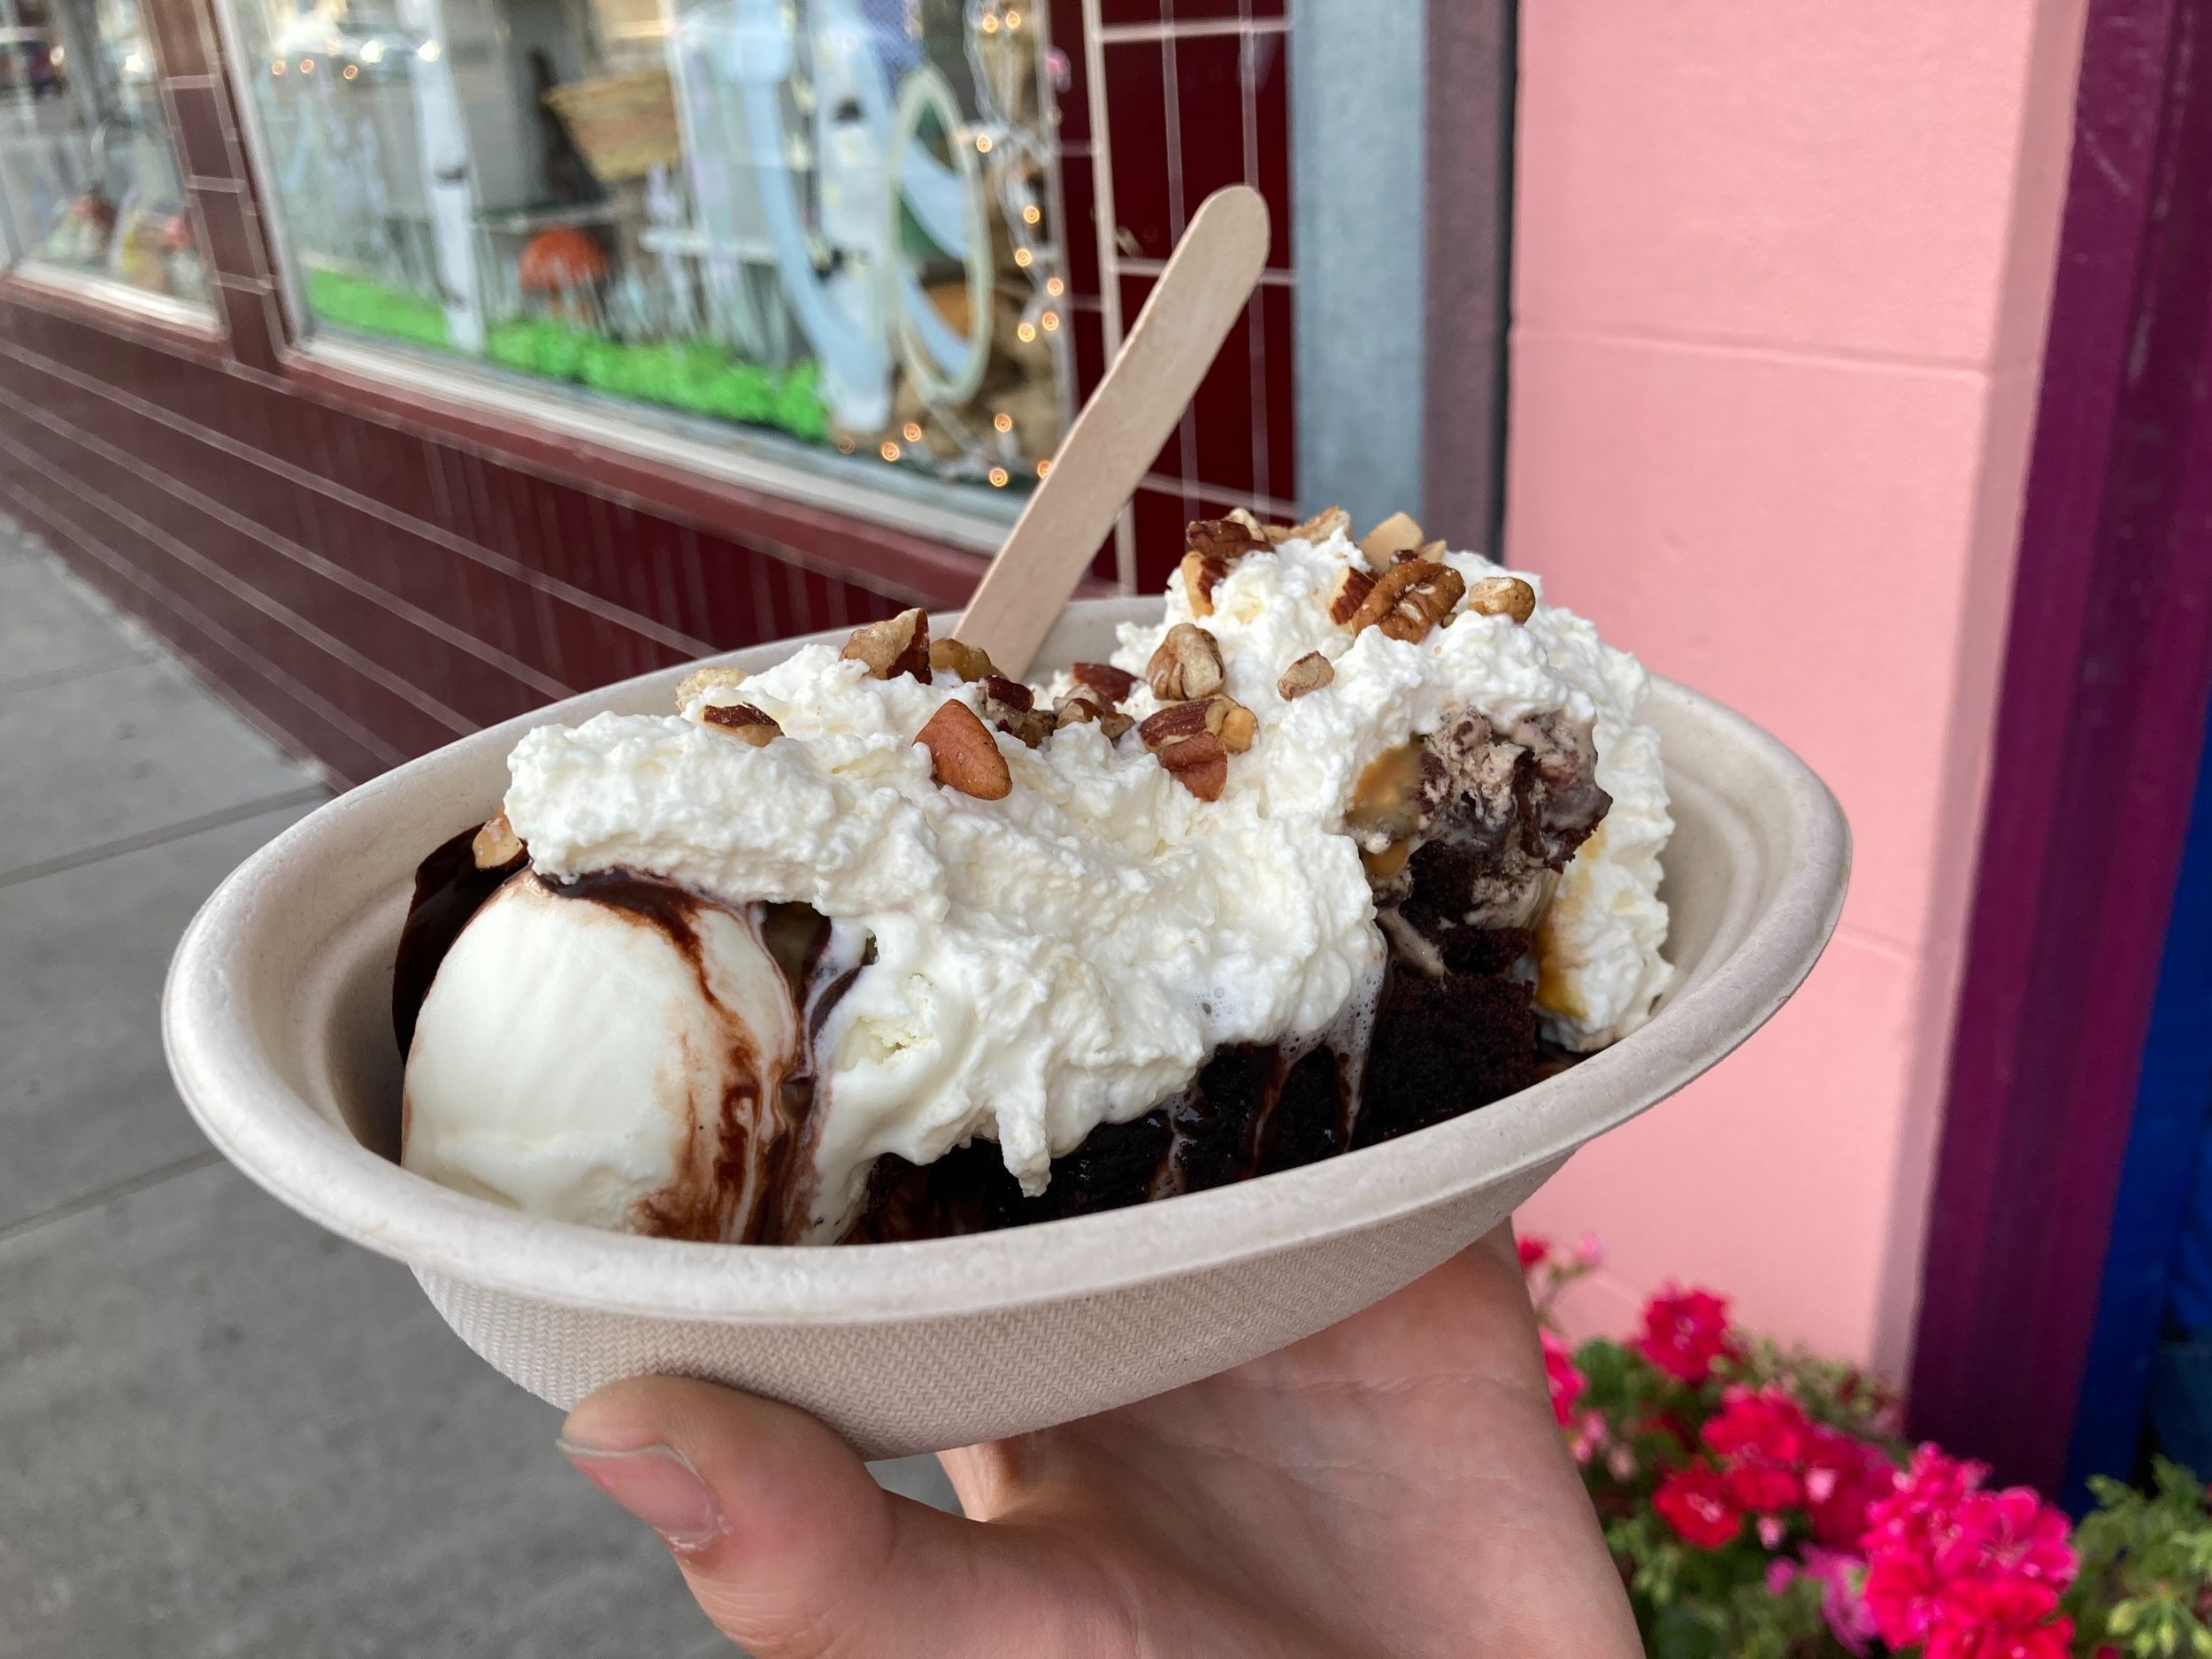  The Screamin' Mimi sundae, with one scoop of root beer ice cream and one scoop of Mimi's Mud, ordered at Screamin' Mimi's (Claire Wu,  The Puma Prensa)  